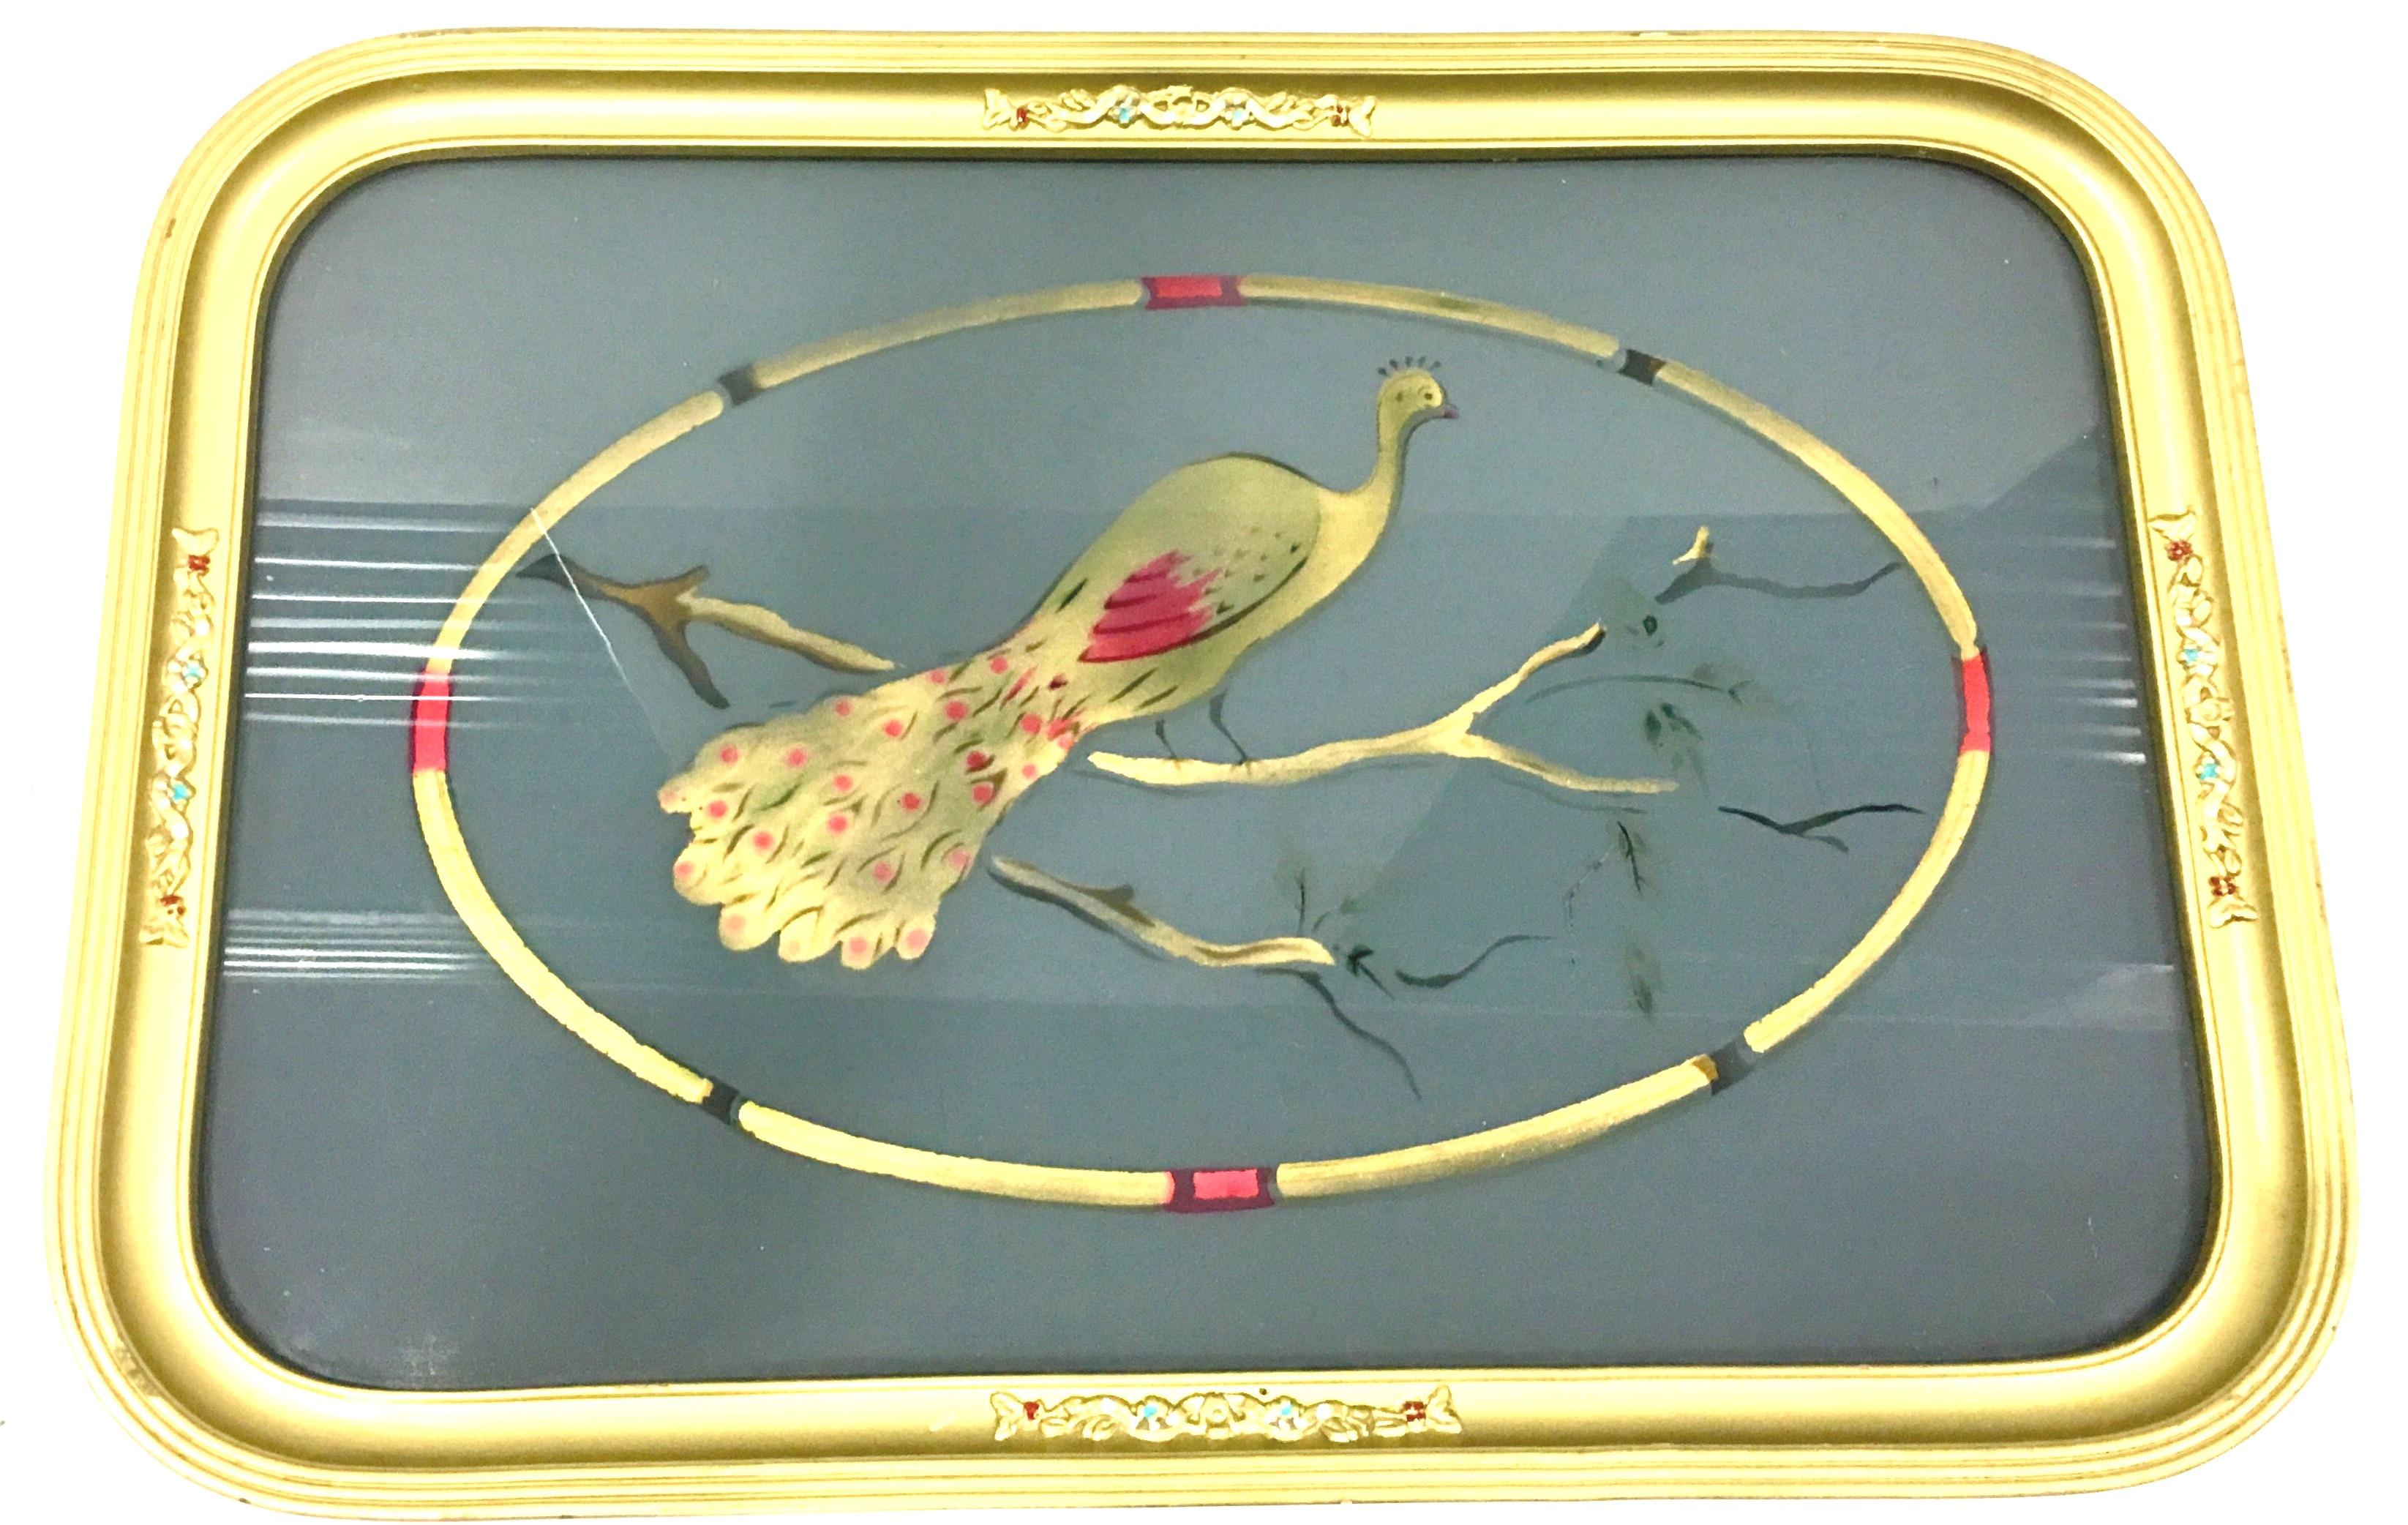 1930s Art Nouveau reverse painted glass and giltwood peacock vanity tray. Felt lined back.